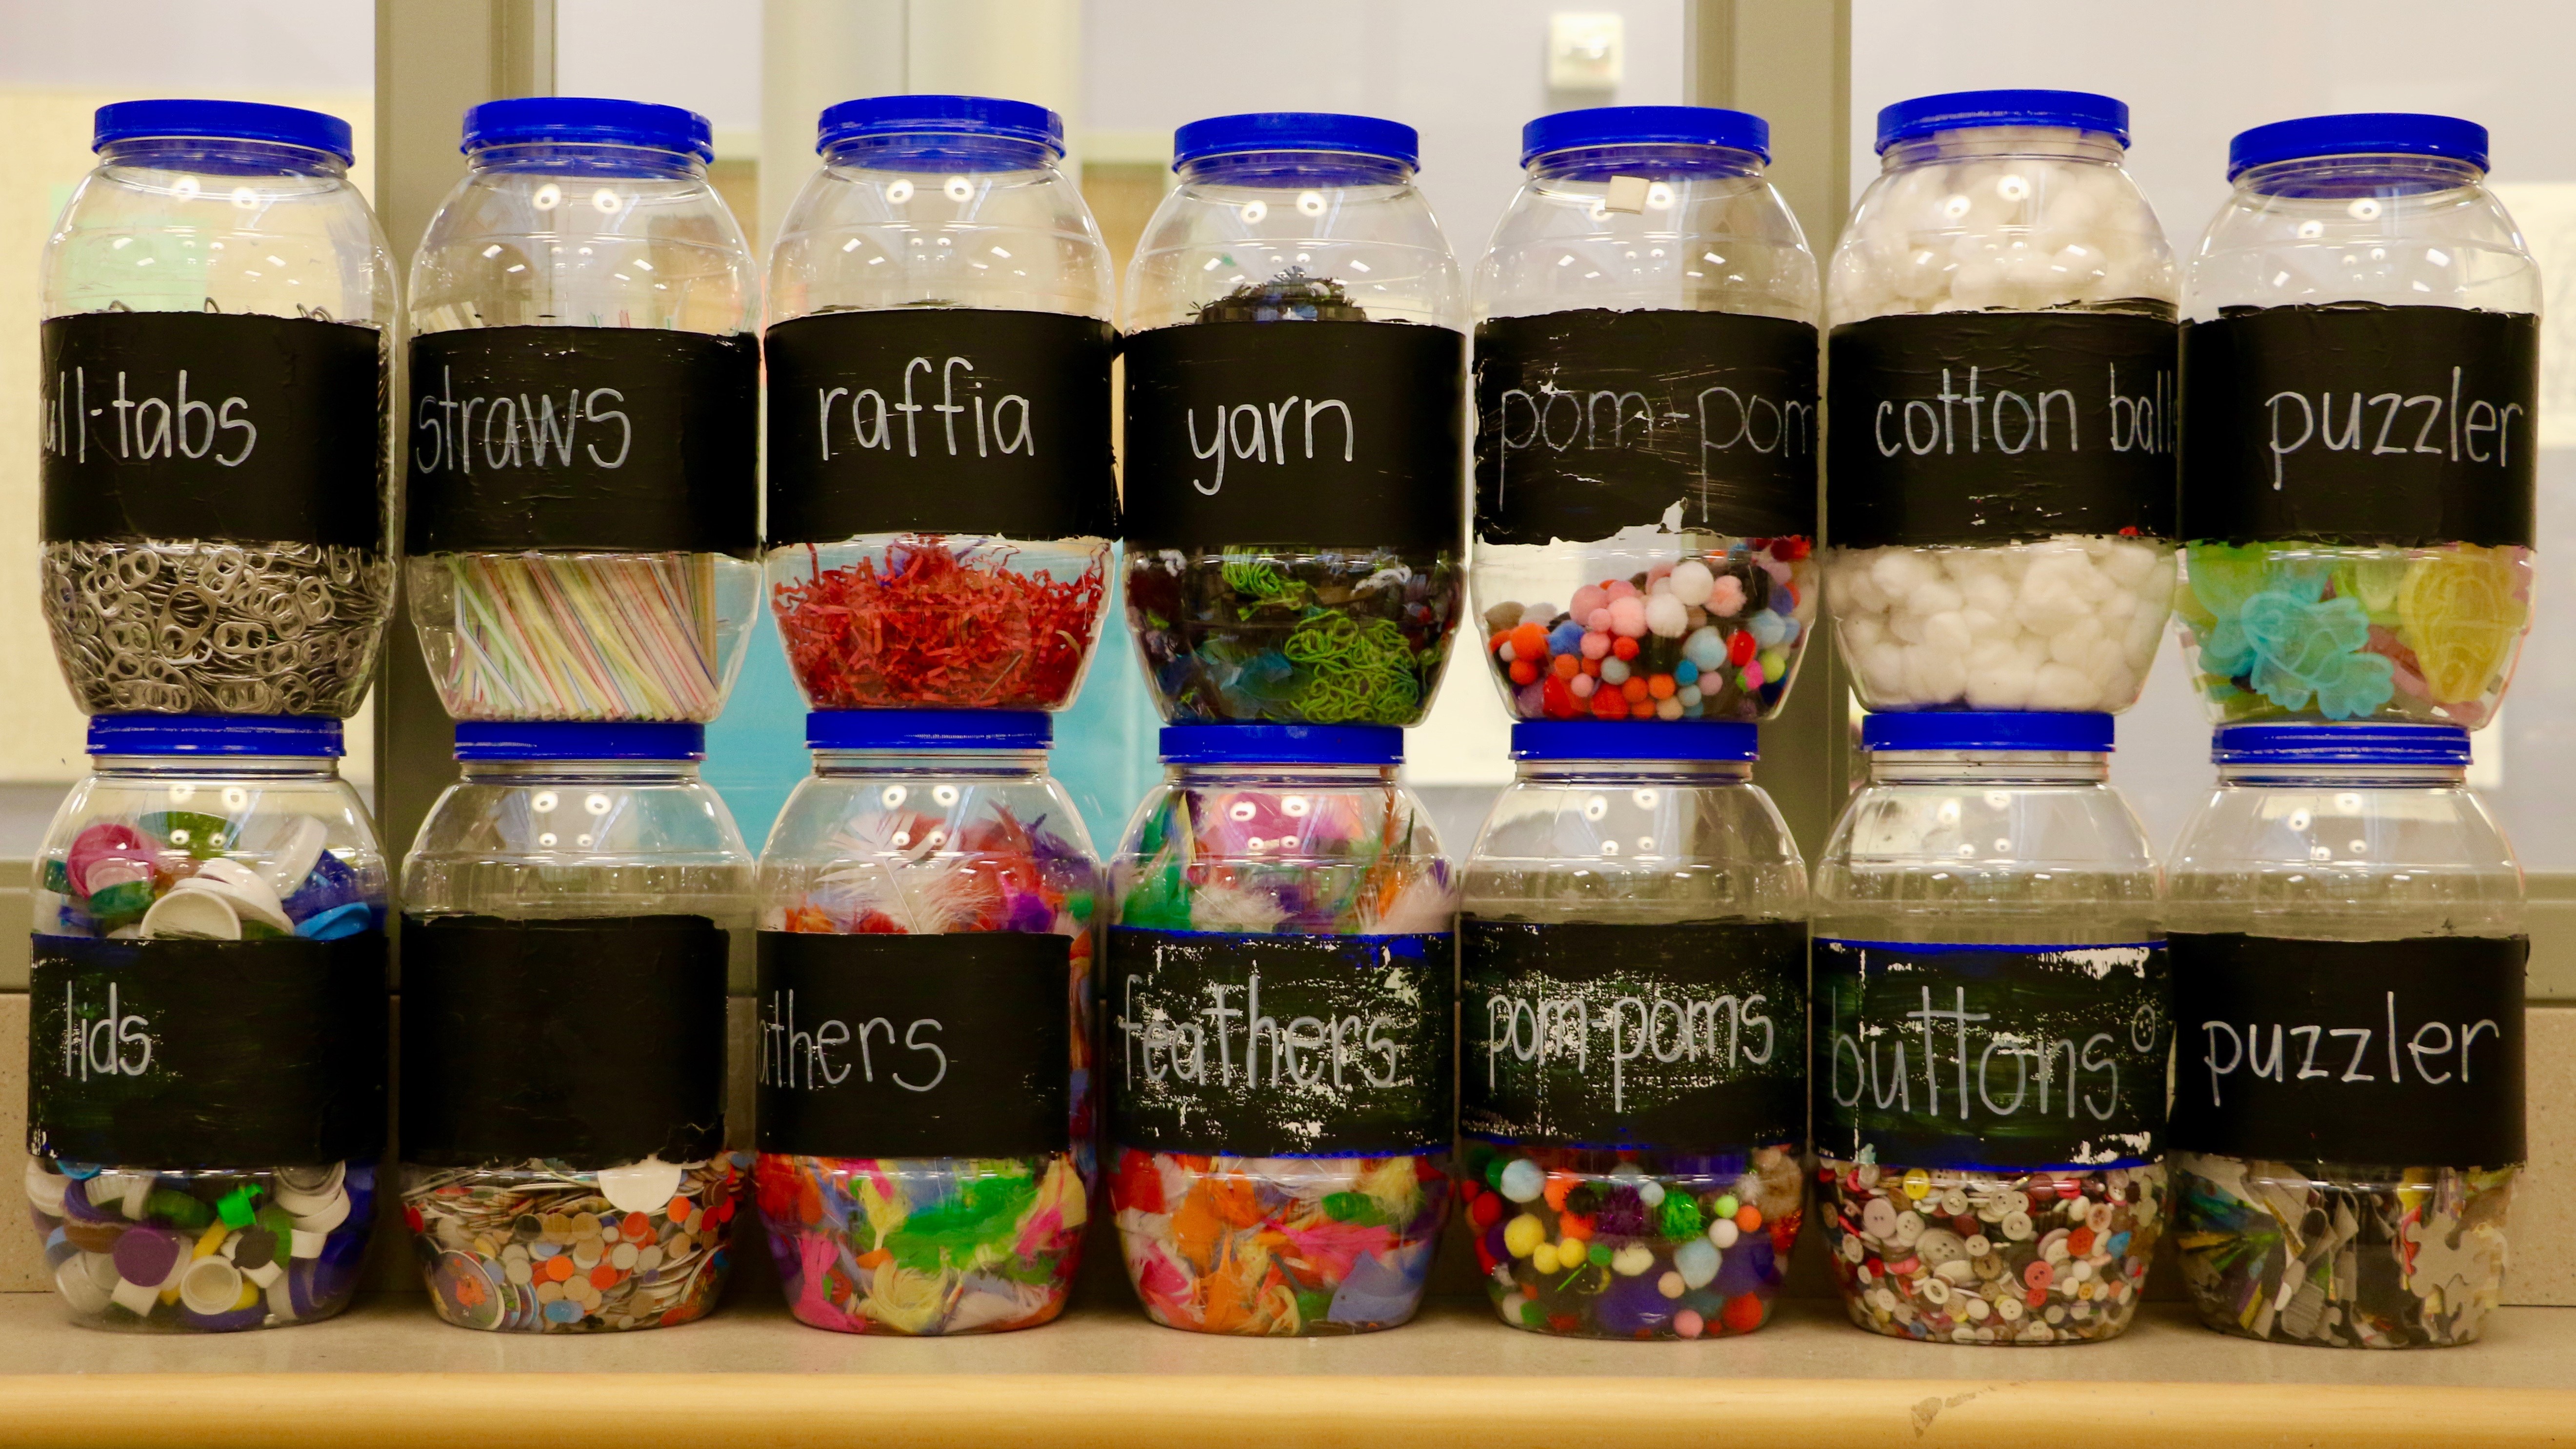 This image shows a row of labeled plastic jars with art supplies in them, including straws, buttons, cotton balls, feathers, and yarn.